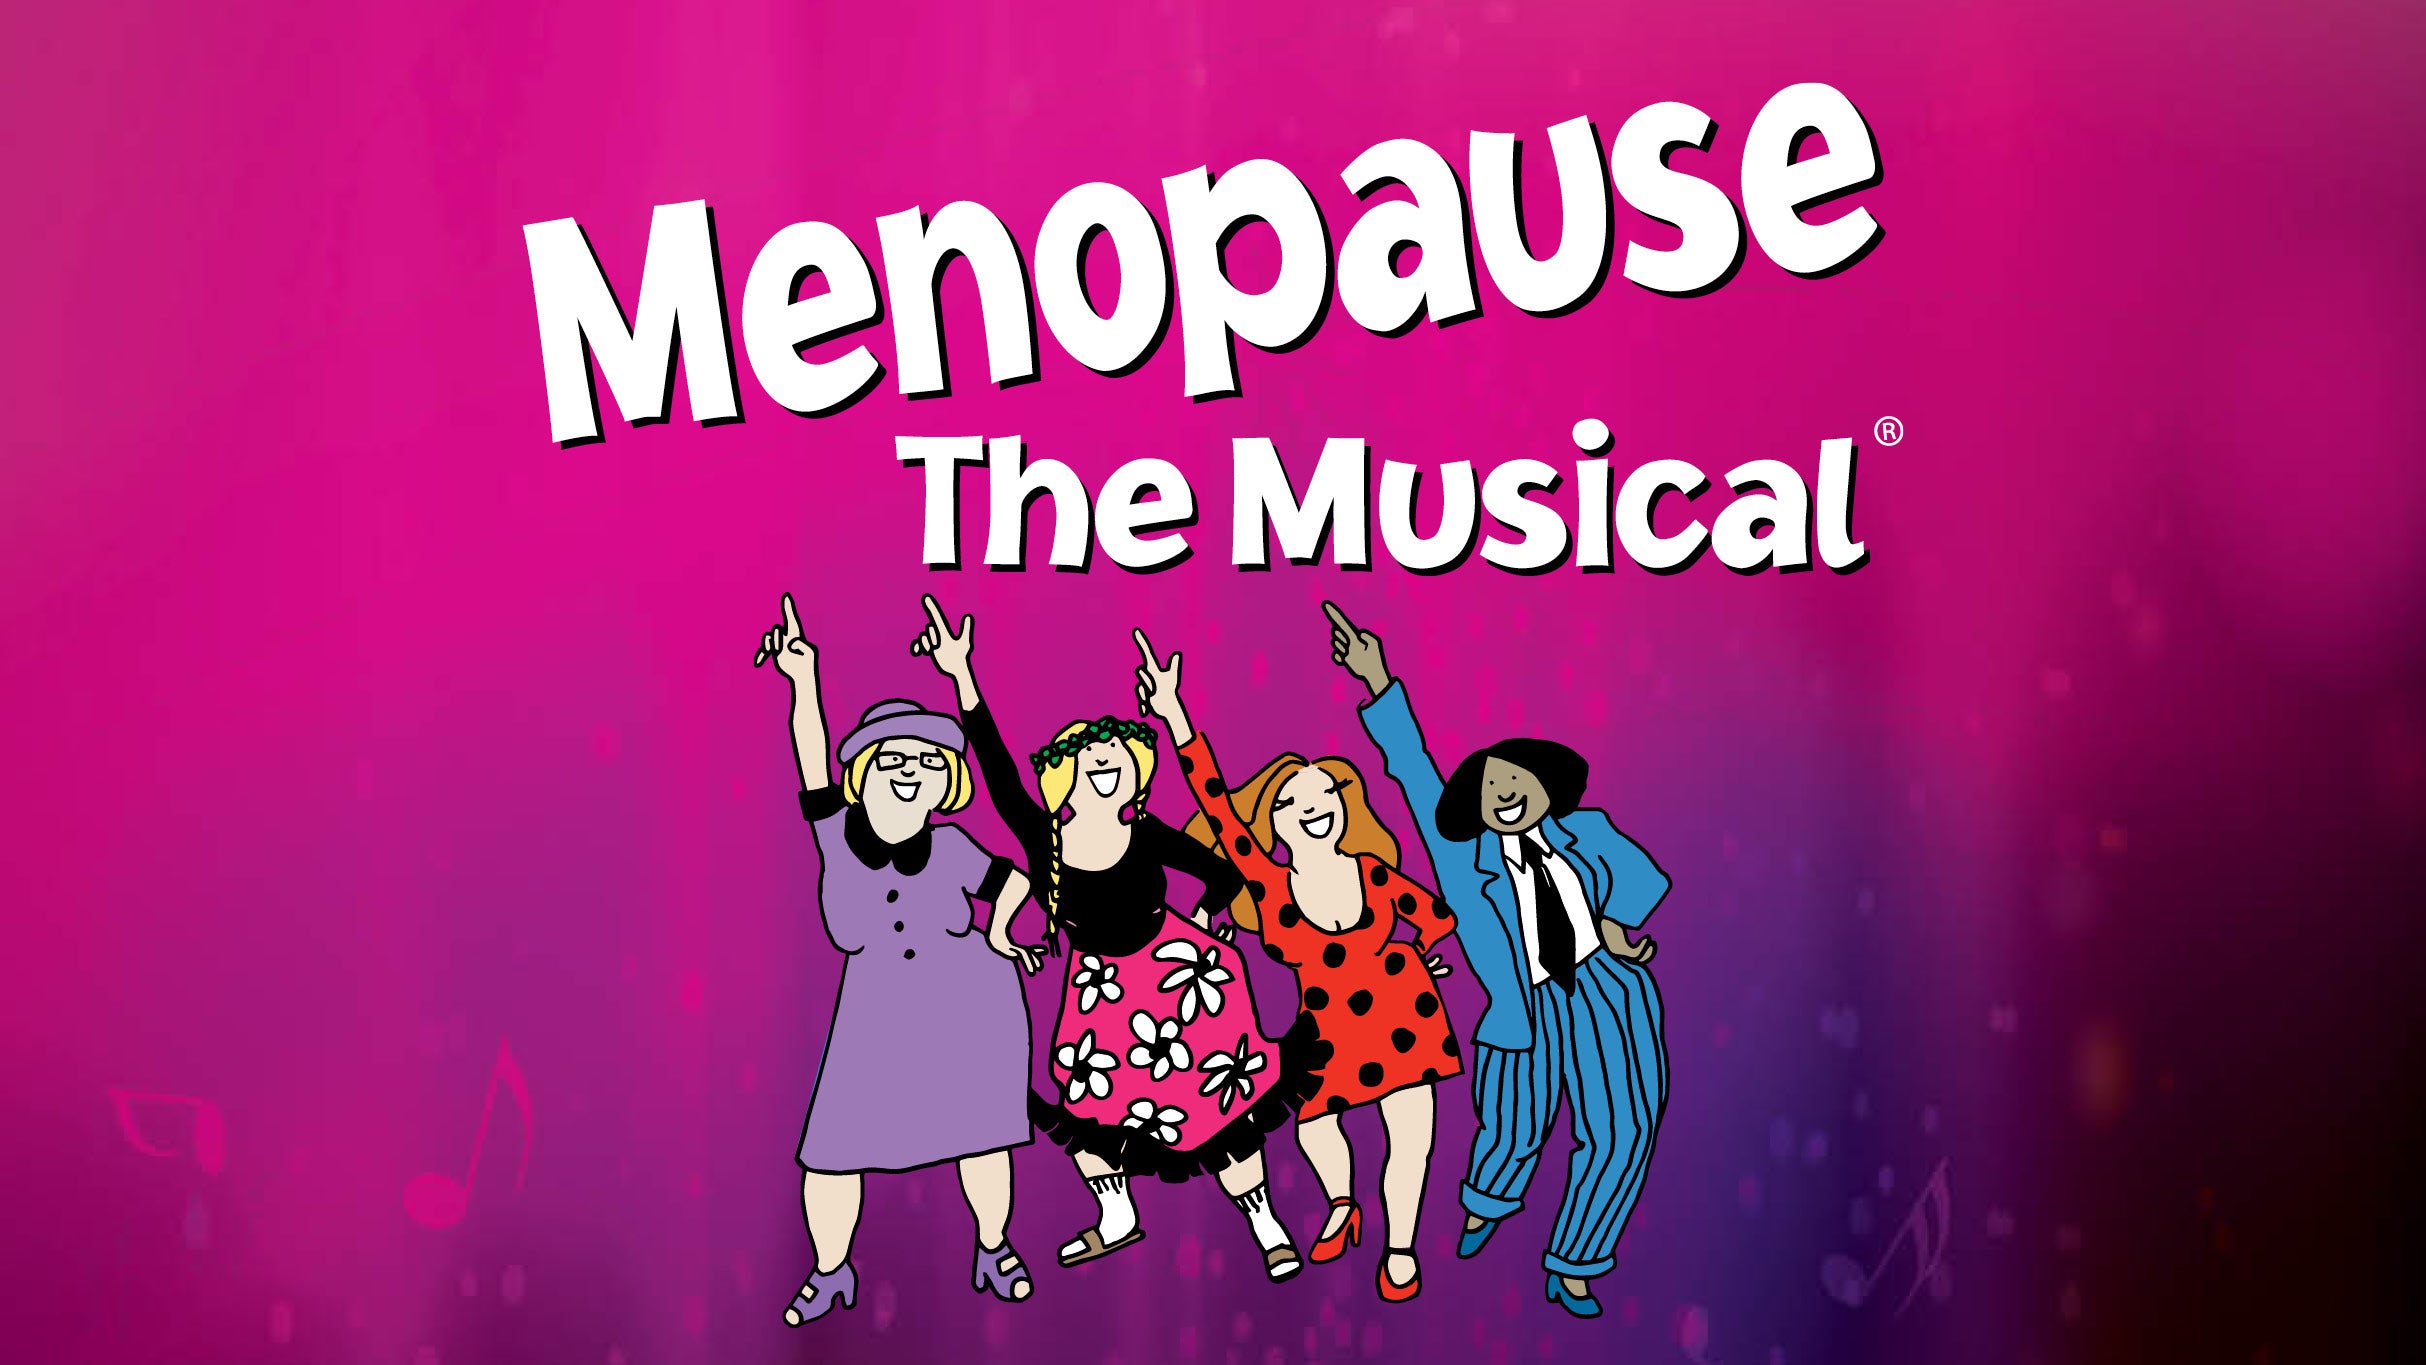 Menopause The Musical (Reno, NV) in Reno promo photo for Me + 3 Promotional  presale offer code